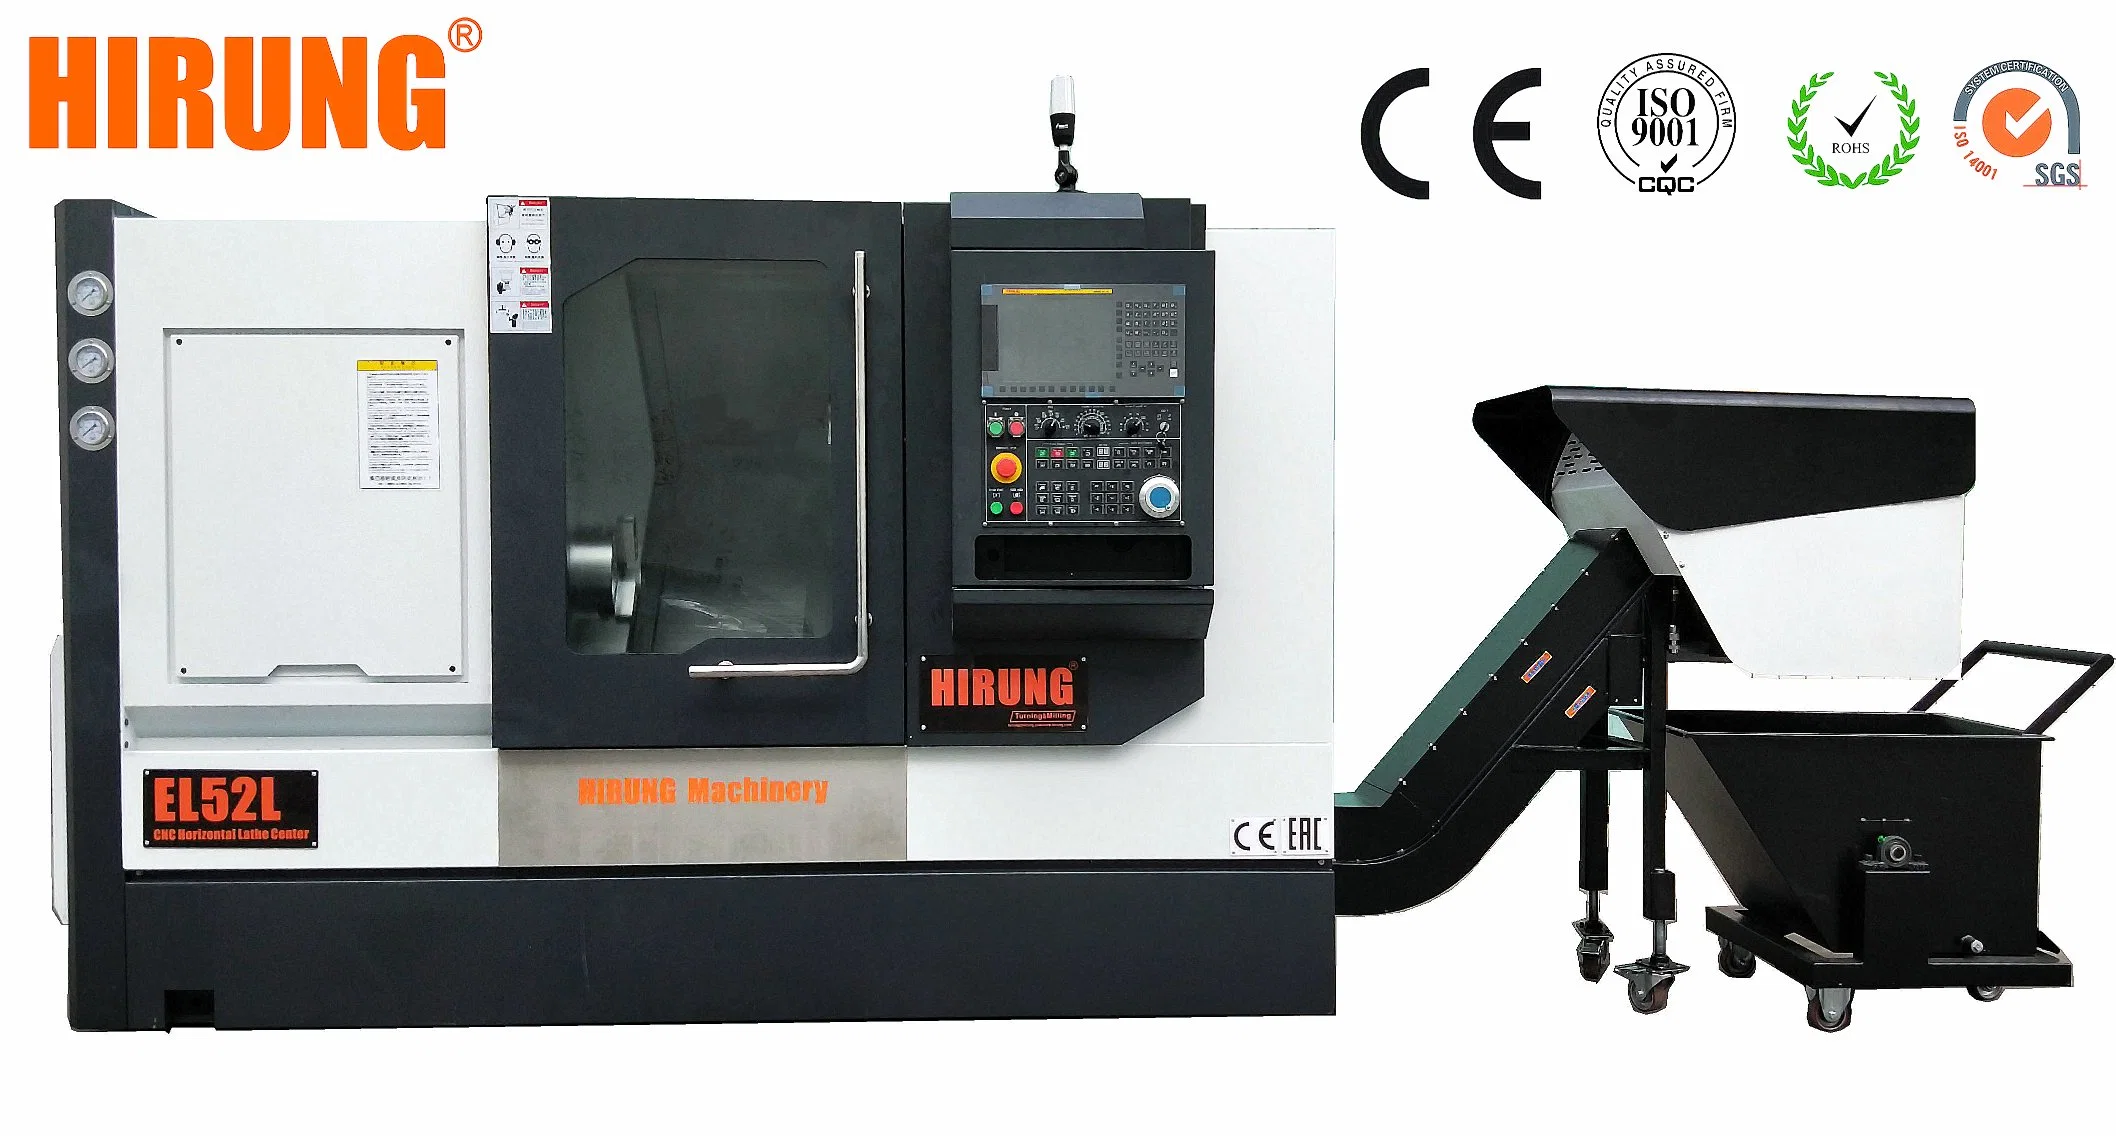 CNC Lathe Machine with High Speed Bevel Angle Ball Bearings, CNC Turning and Cutting Machine (EL42L)